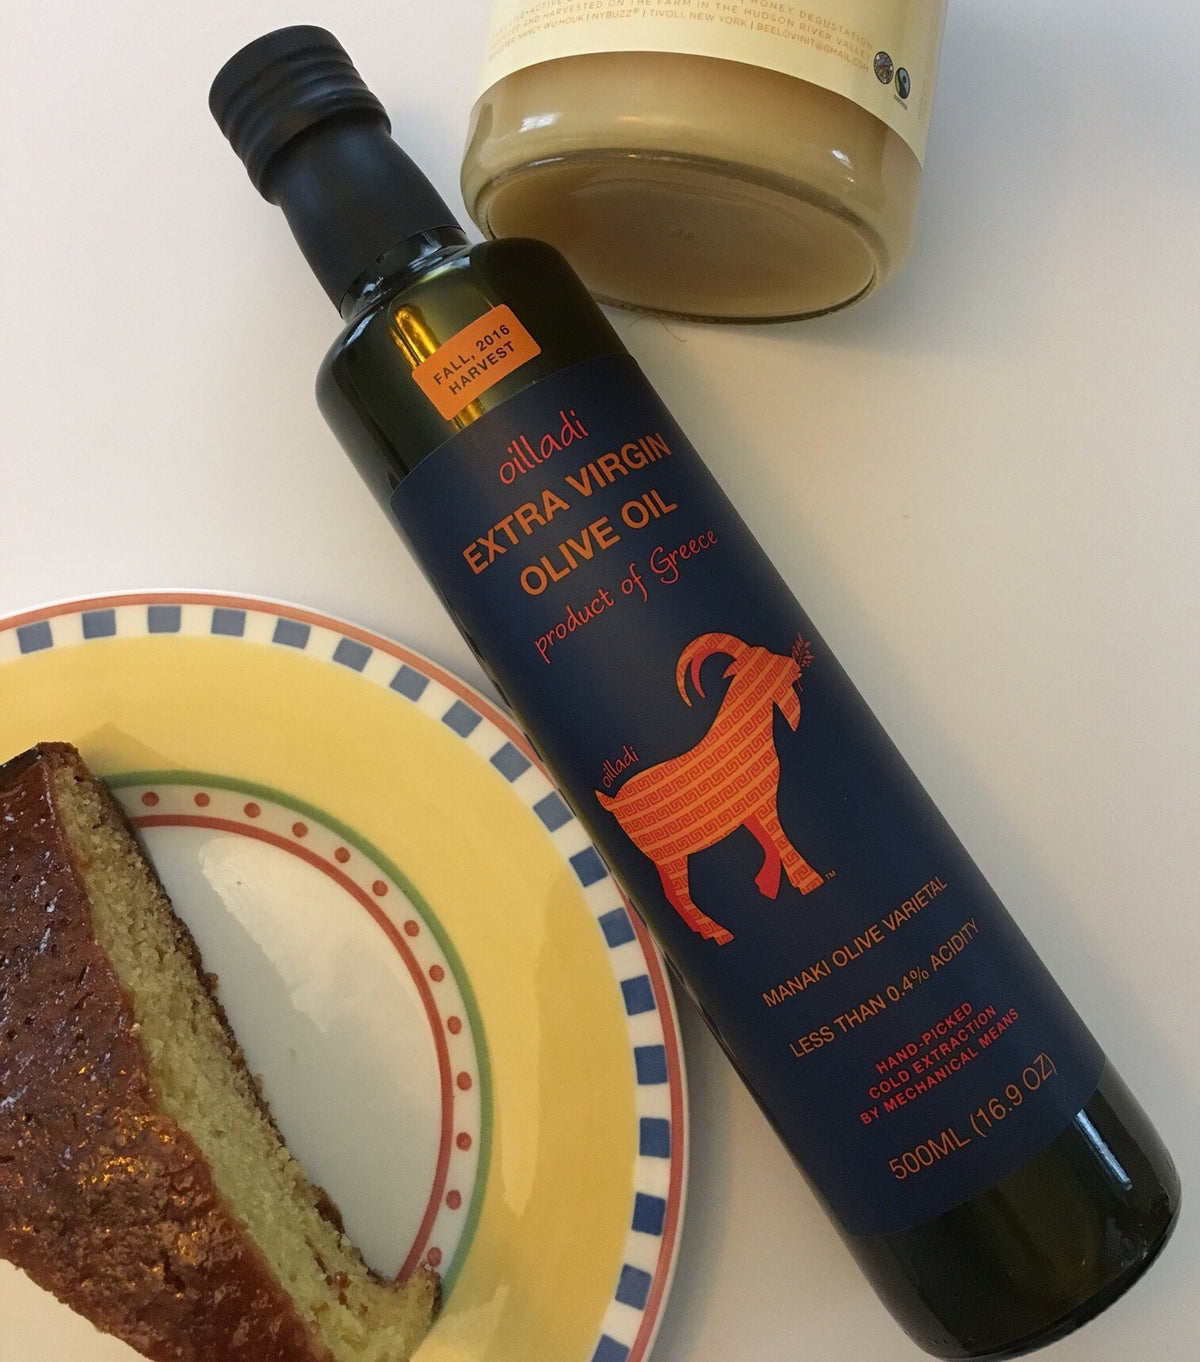 Extra virgin olive oil EVOO imported from Greece with piece of cake on a plate